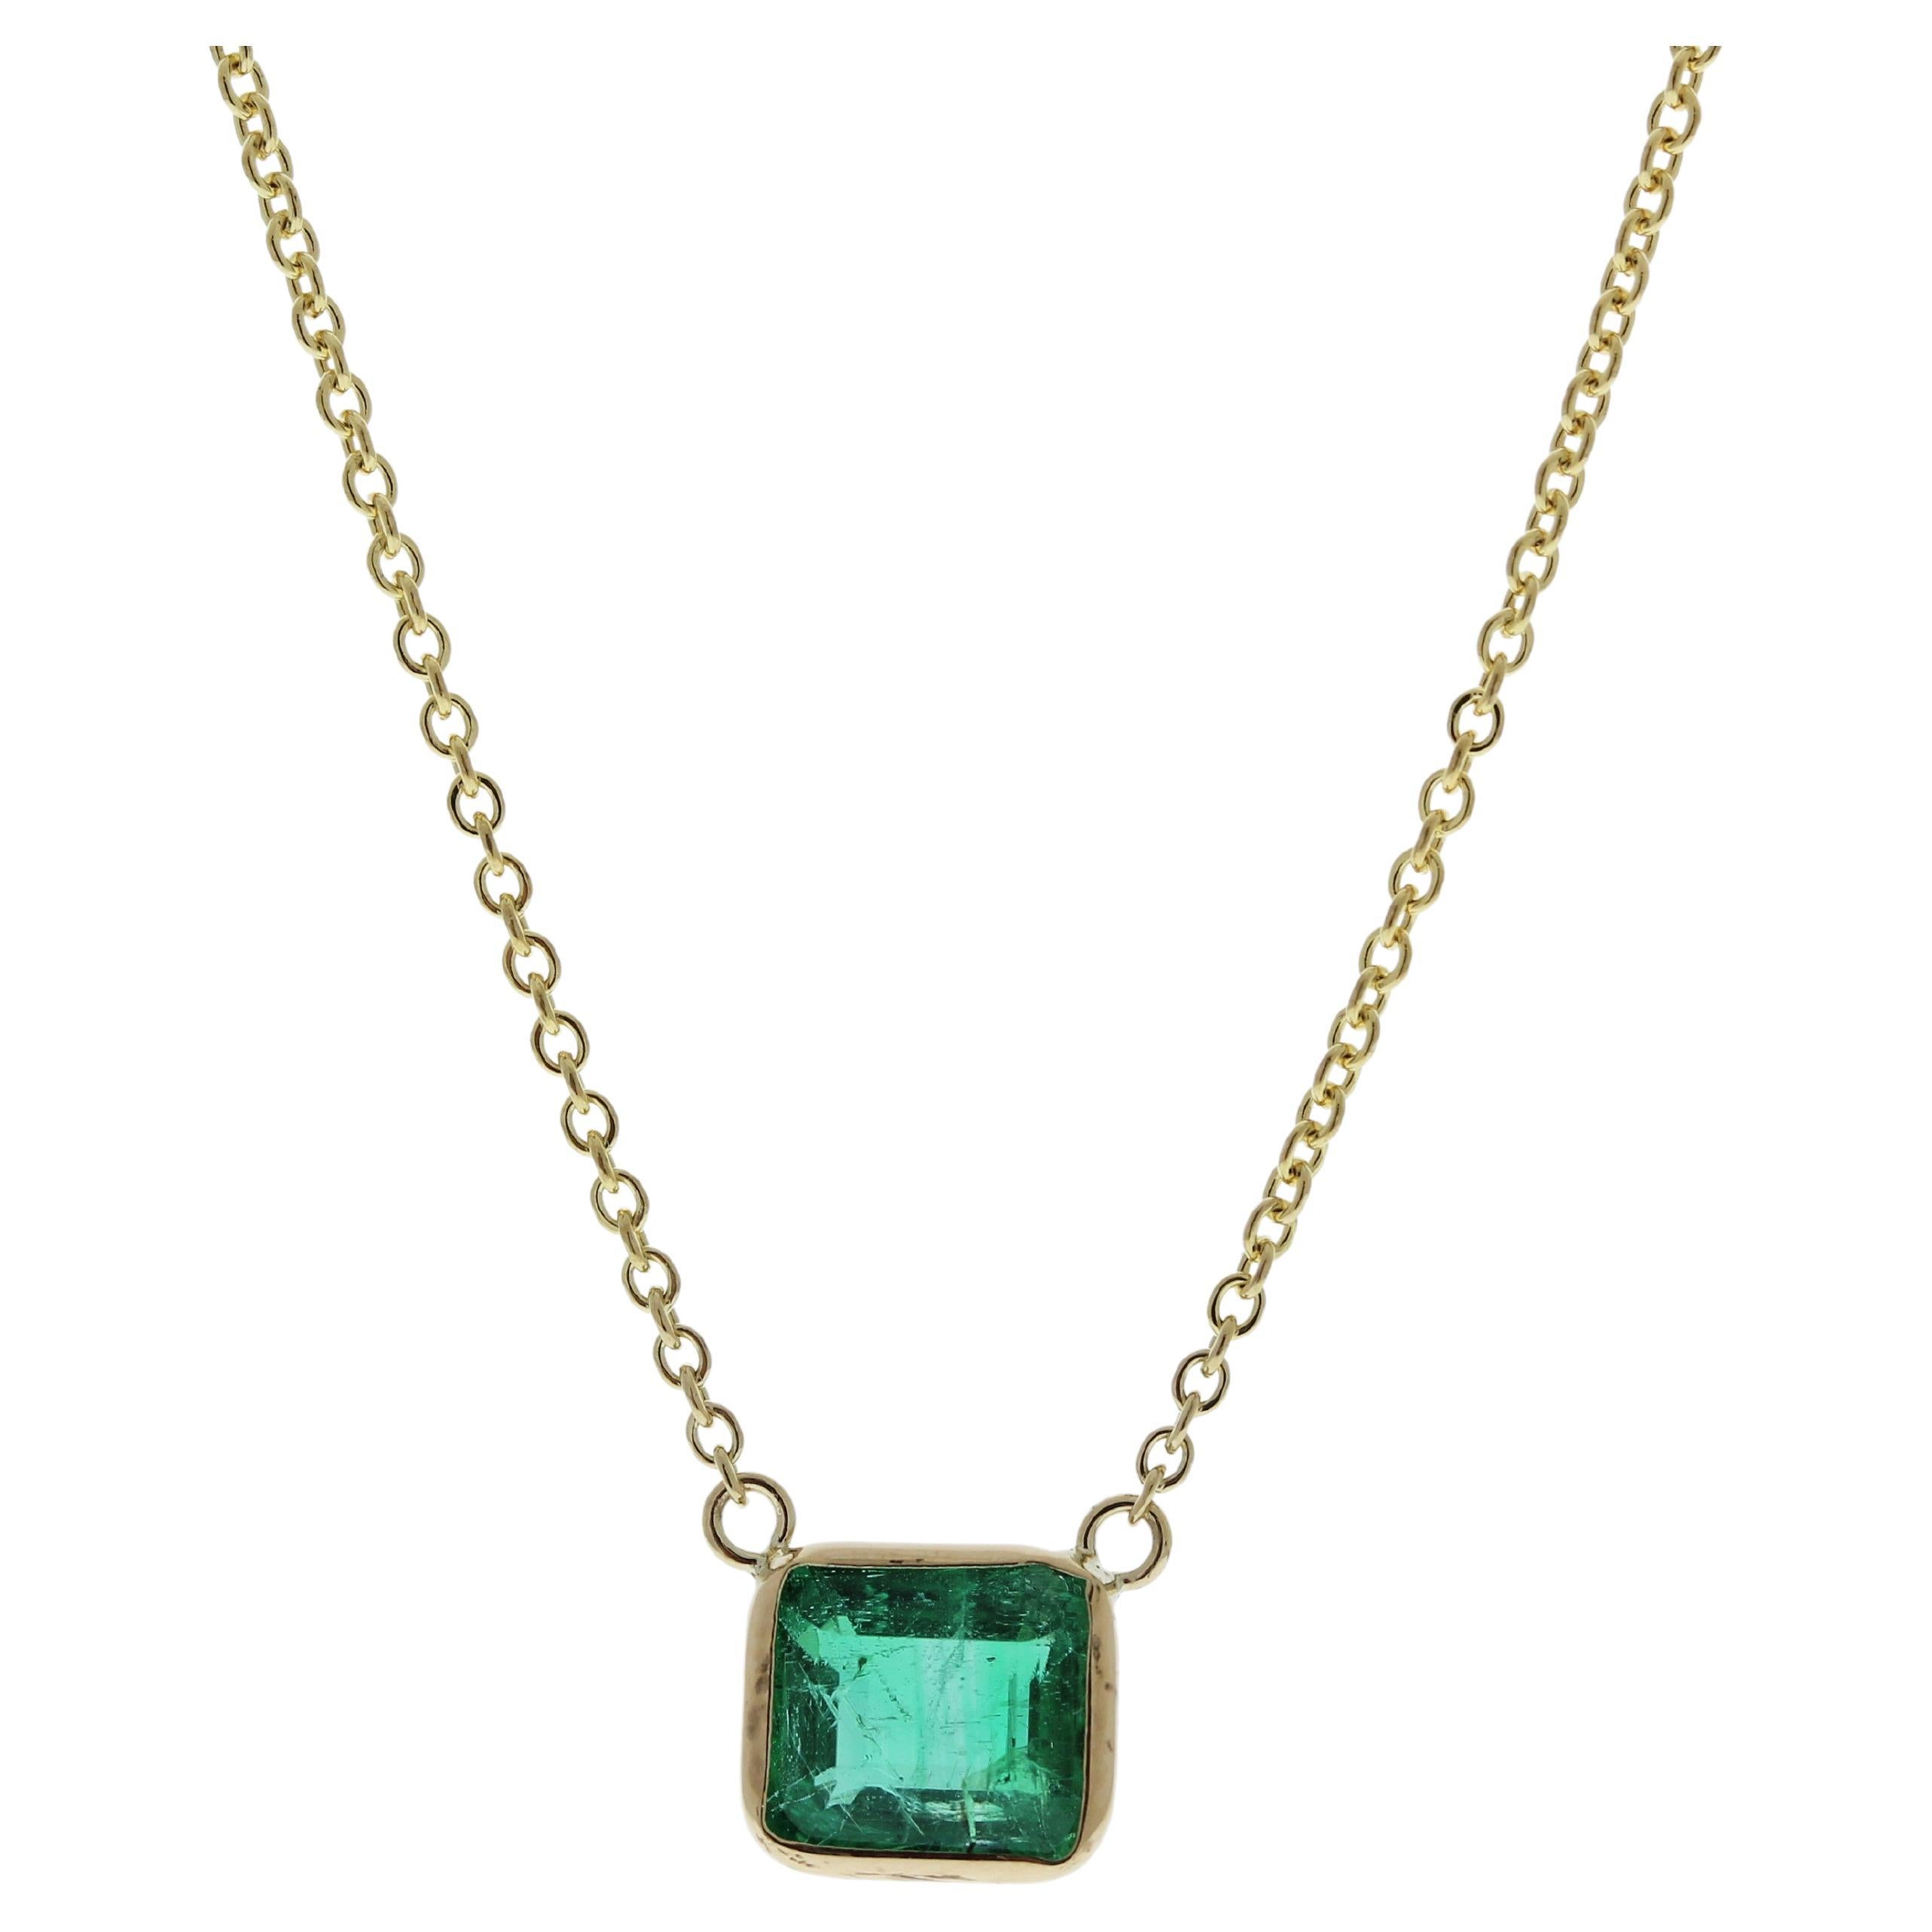 1.15 Carat Emerald Bluish Green Fashion Necklaces In 14k Yellow Gold For Sale